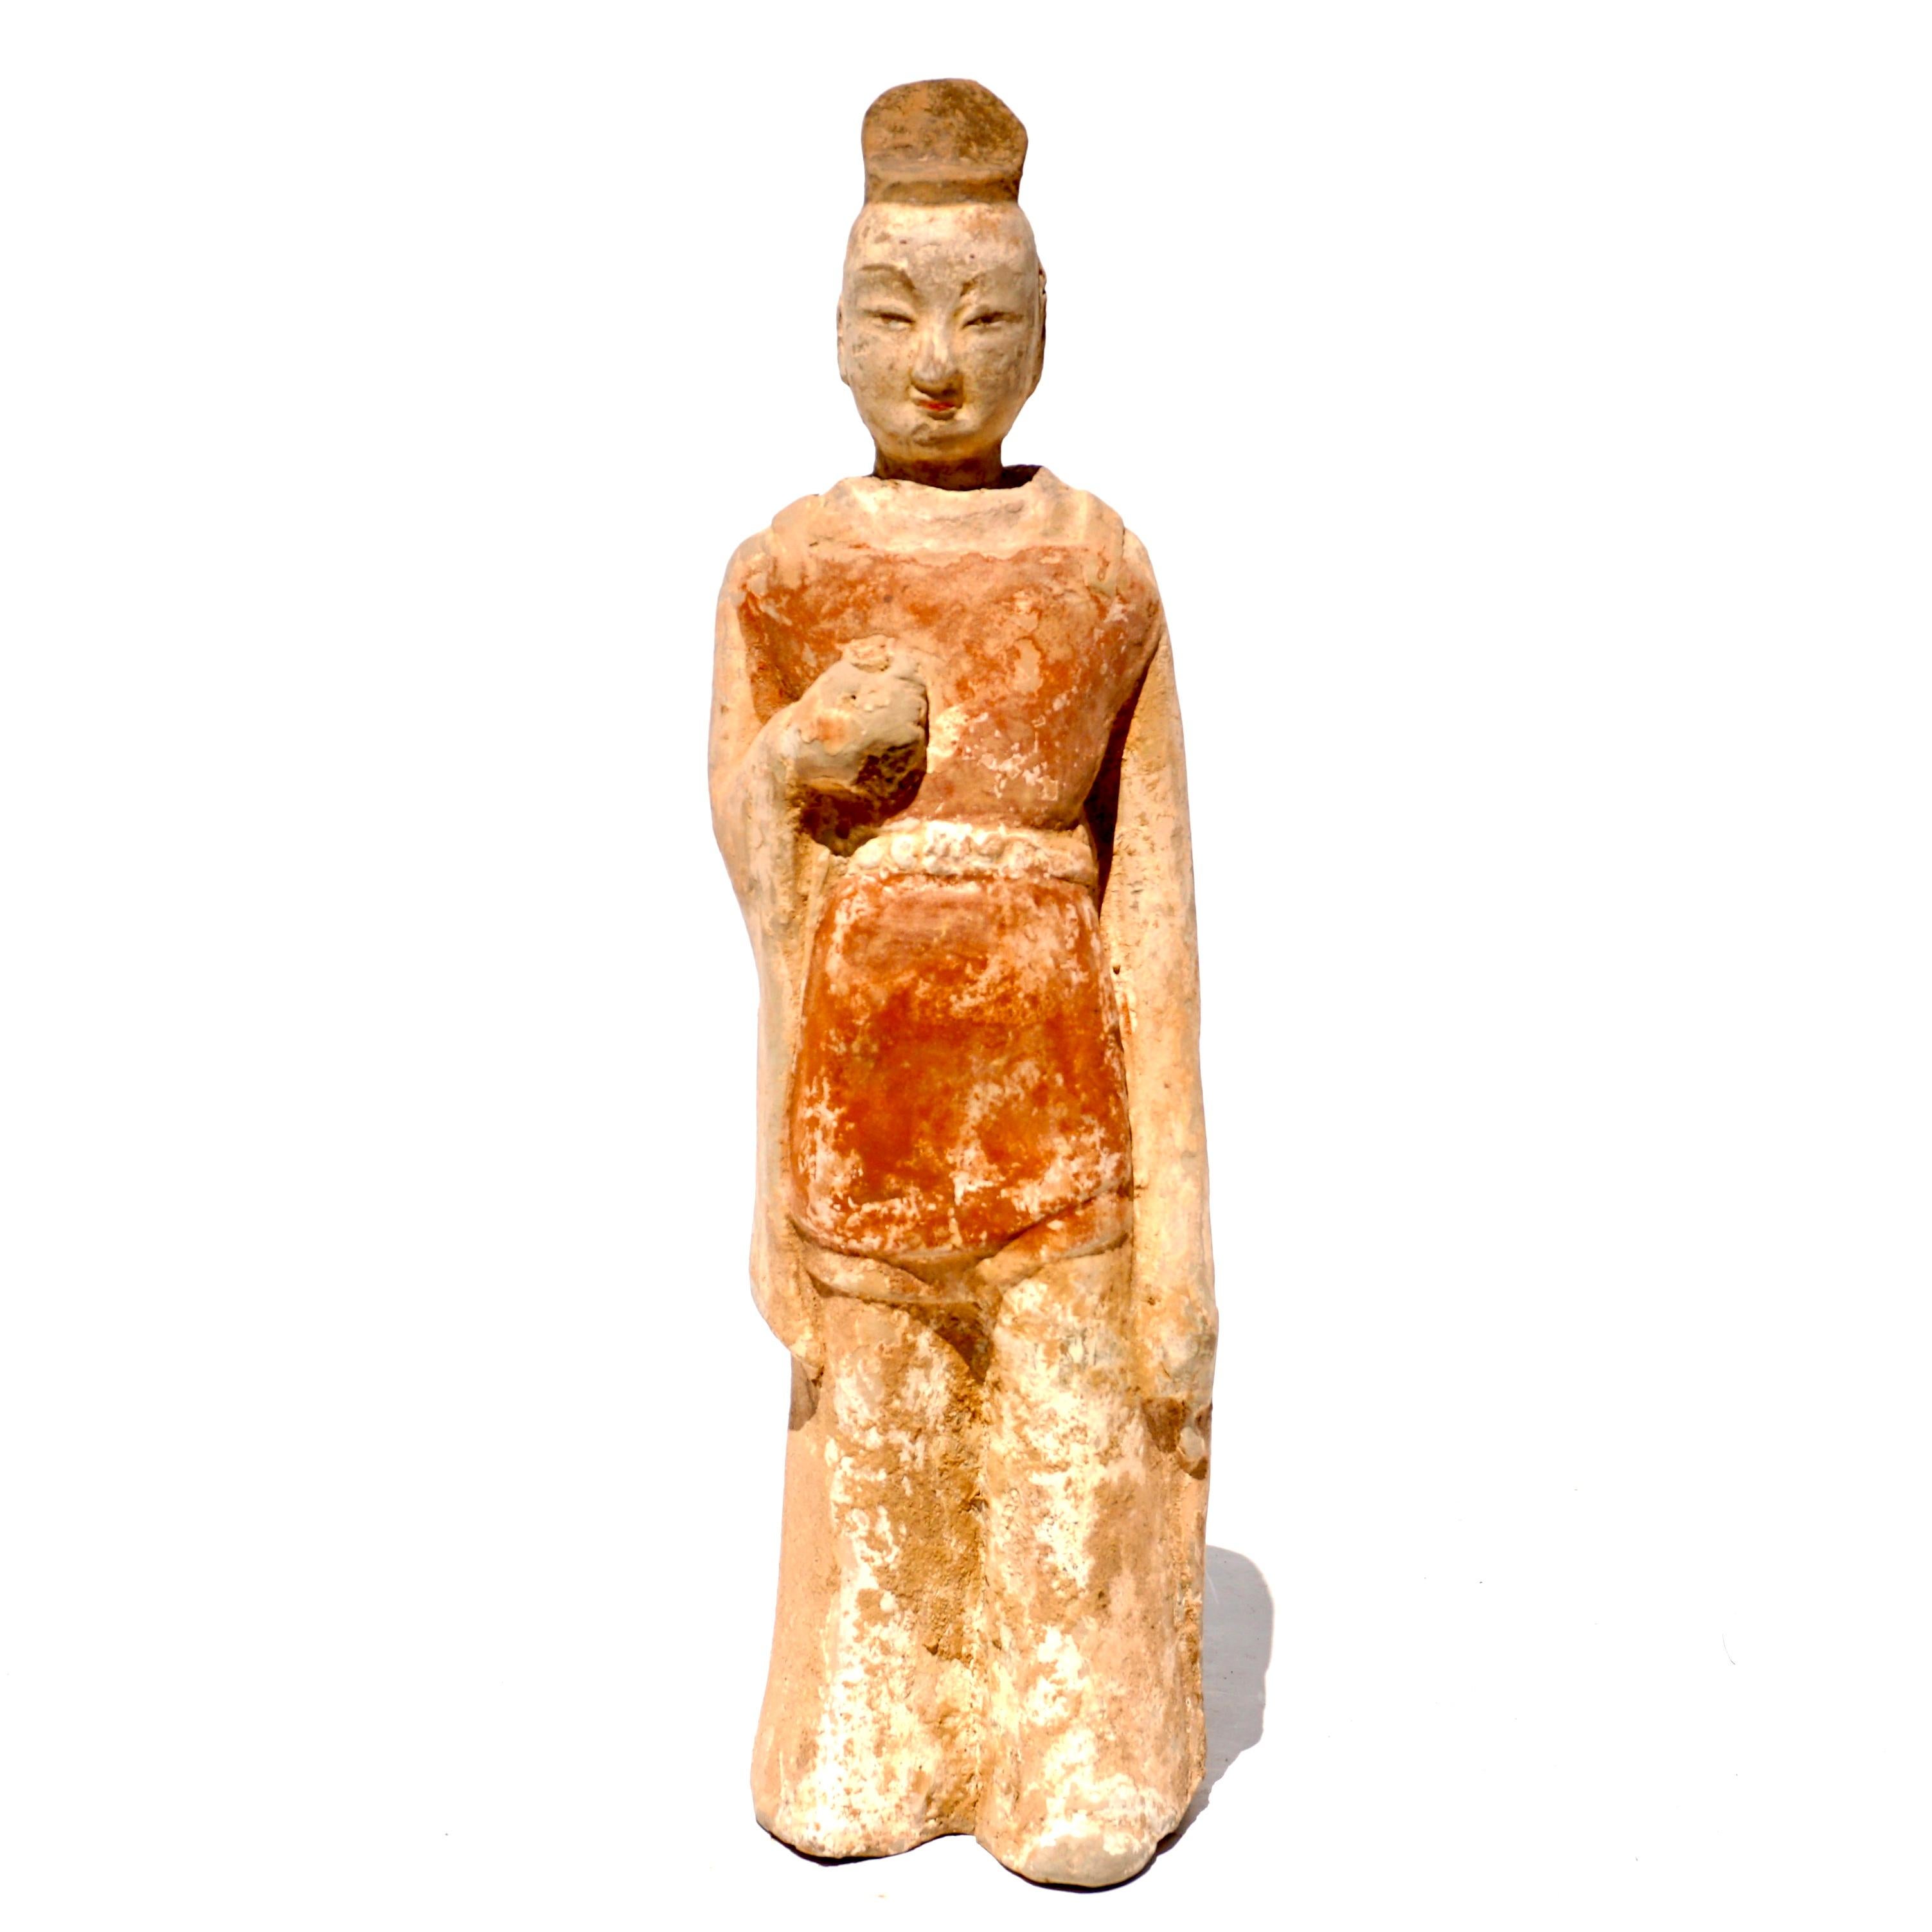 Circa 386-534 ADA well defined Chinese Northern Wei Terracotta Attendant Statue. 

The Figure is depicted standing with his hands along the body, wearing mid-length, red robe with wide sleeves and voluminous trousers. Well detailed face, modelled